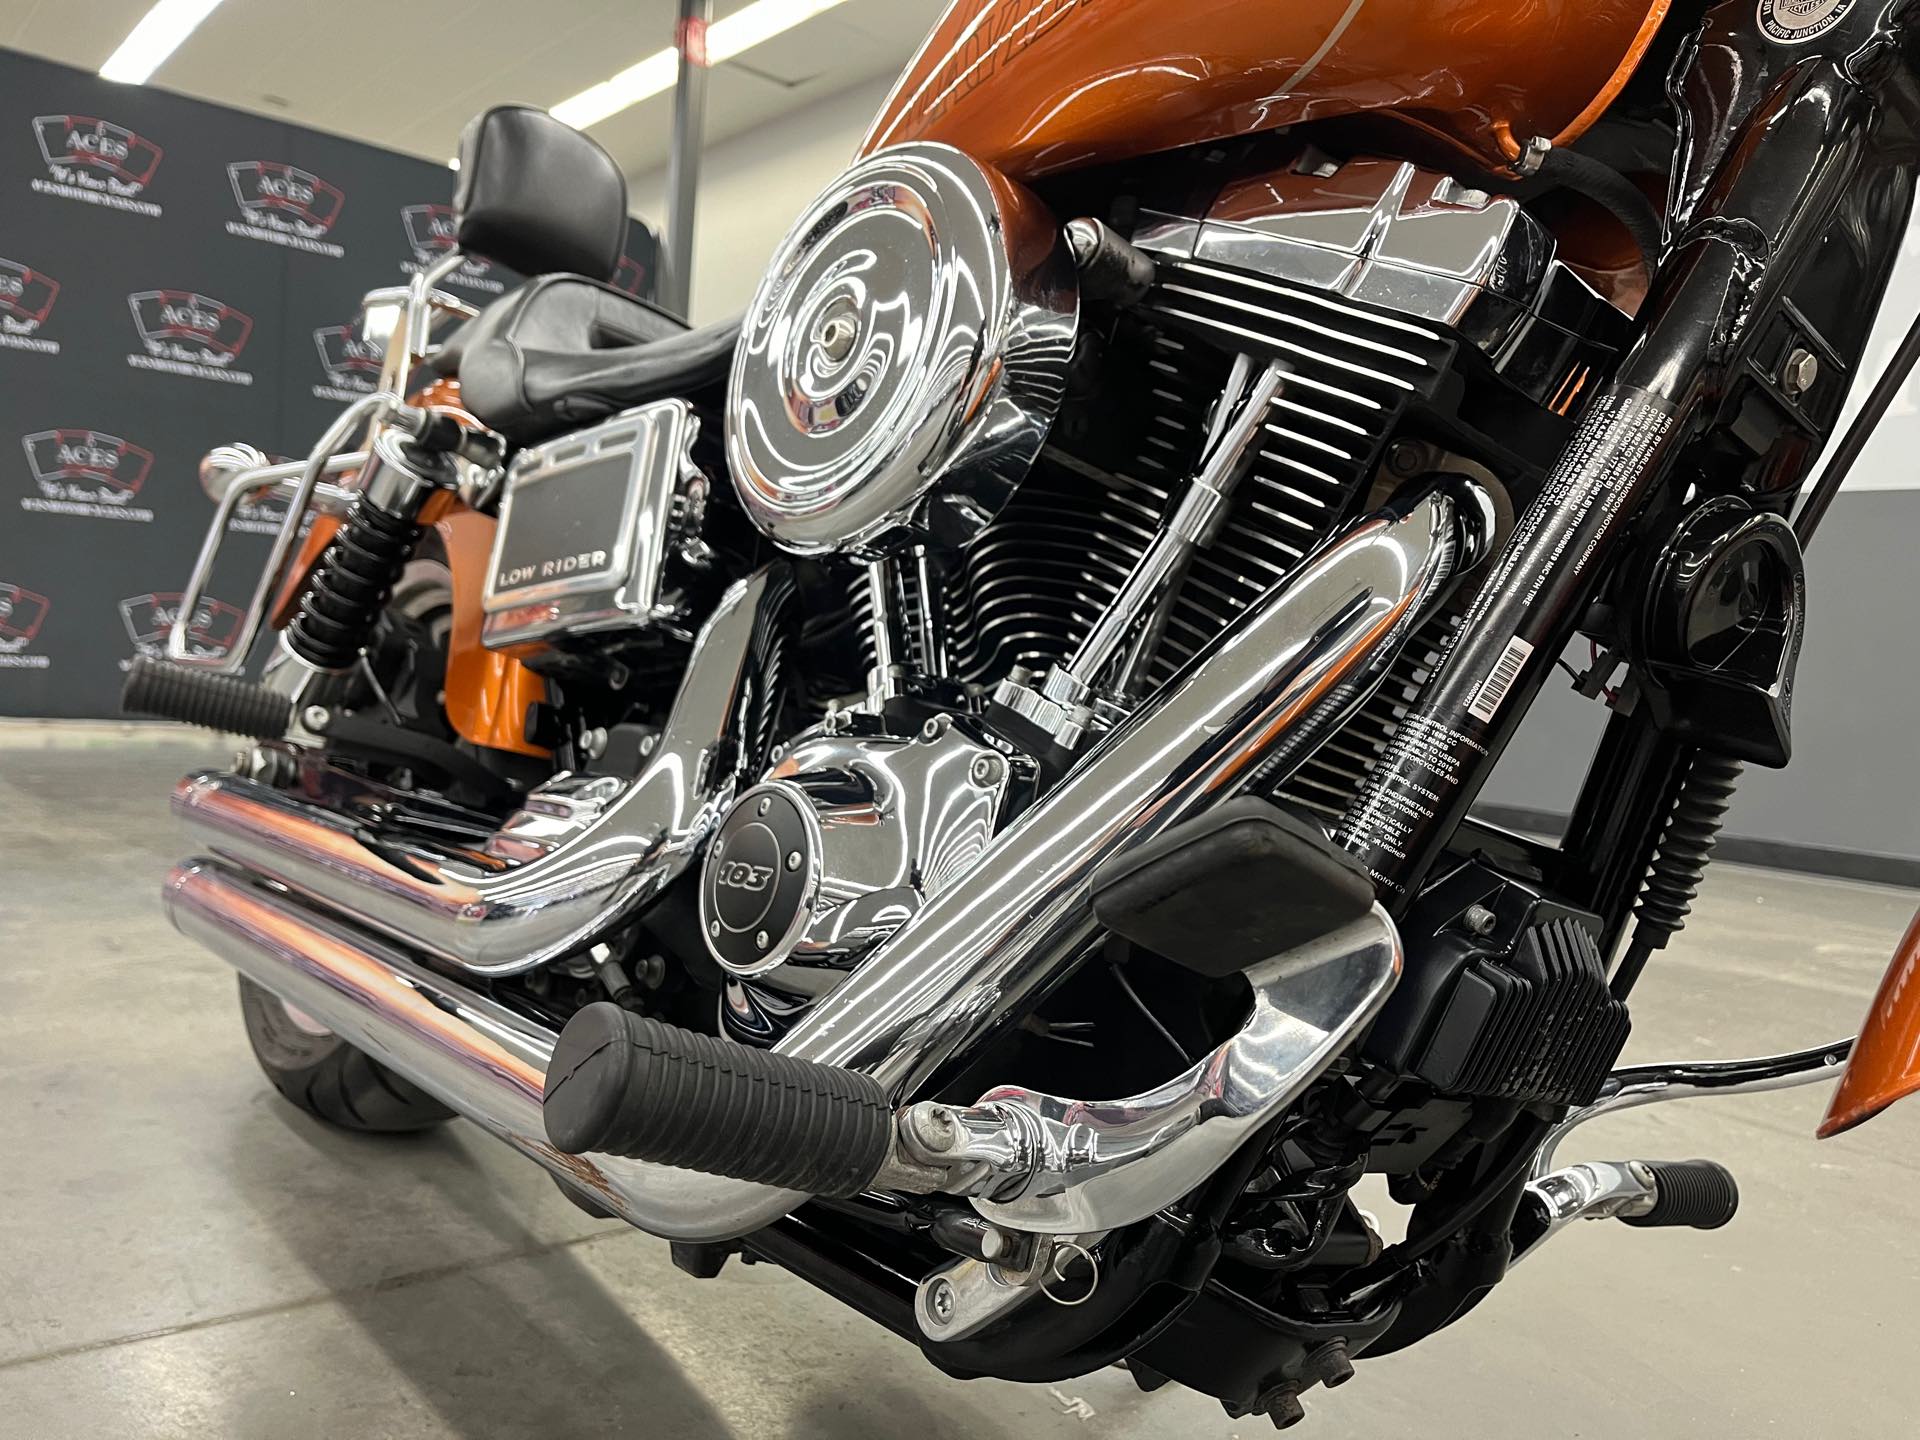 2015 Harley-Davidson Dyna Low Rider at Aces Motorcycles - Denver